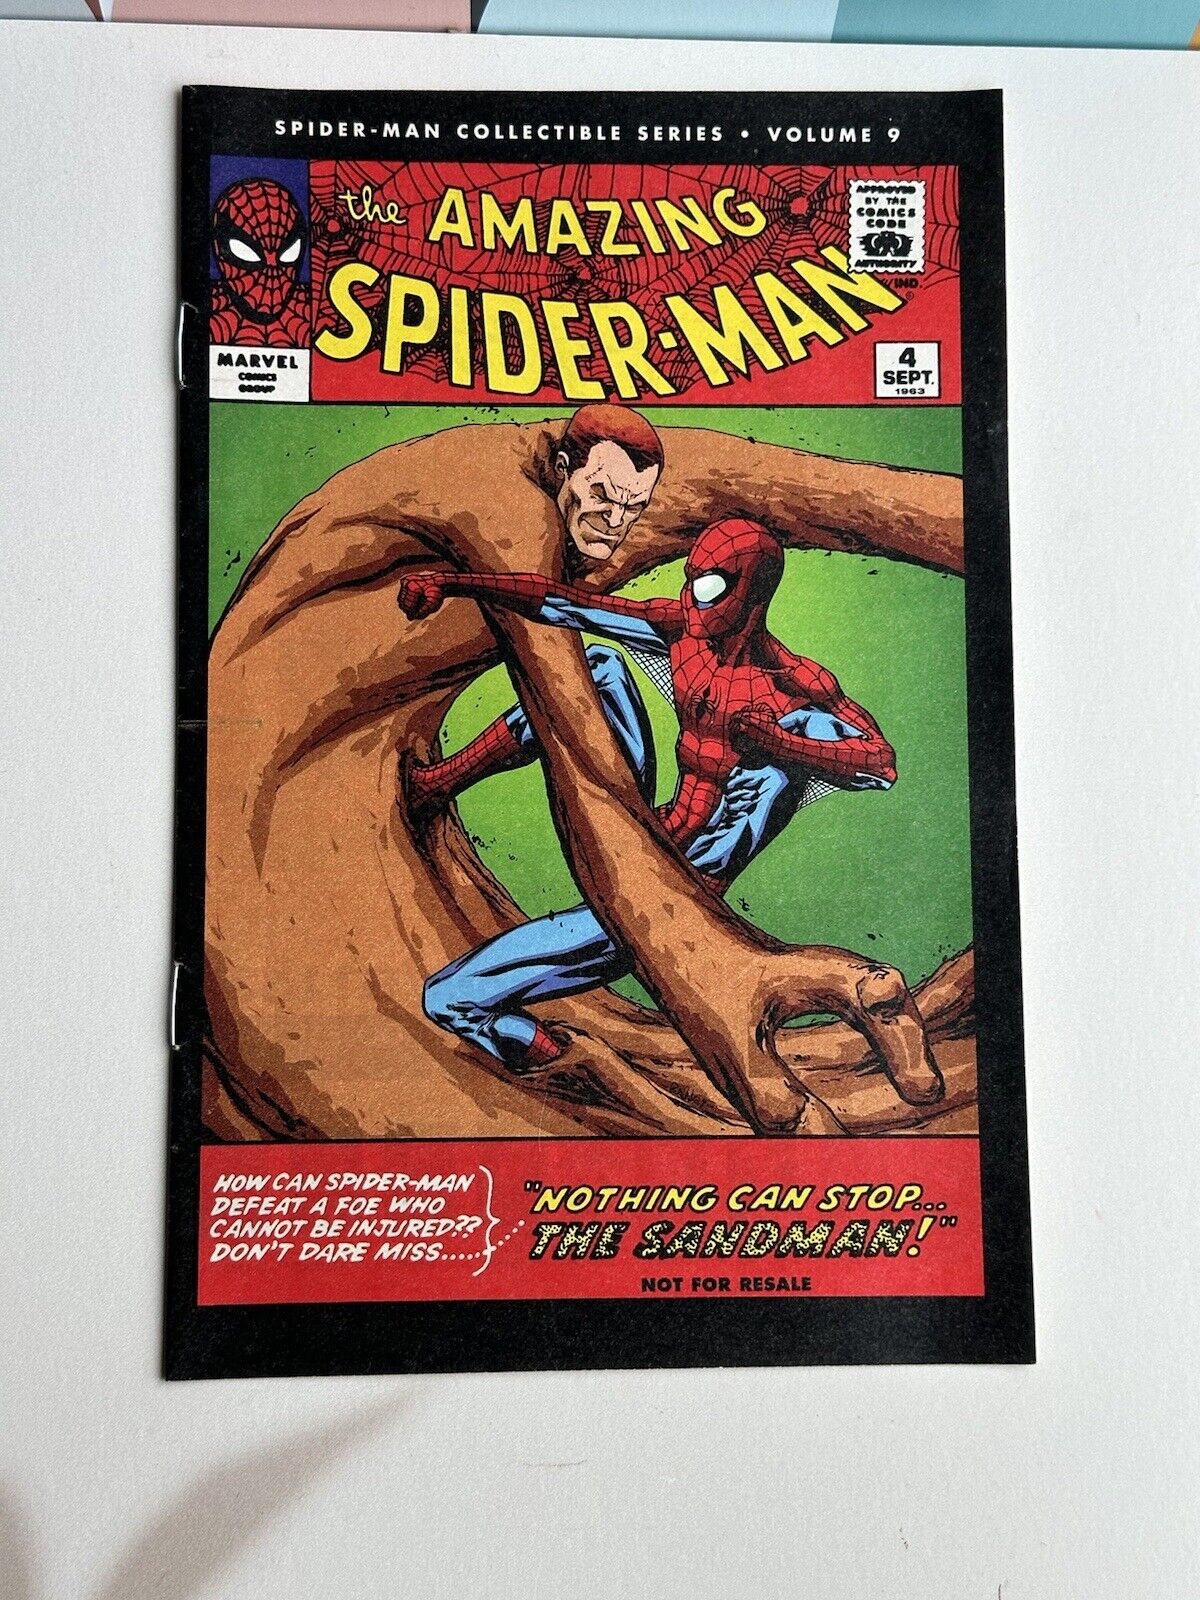 THE AMAZING SPIDER-MAN Vol #9 Collectible Series Newspaper insert Comic (2006)